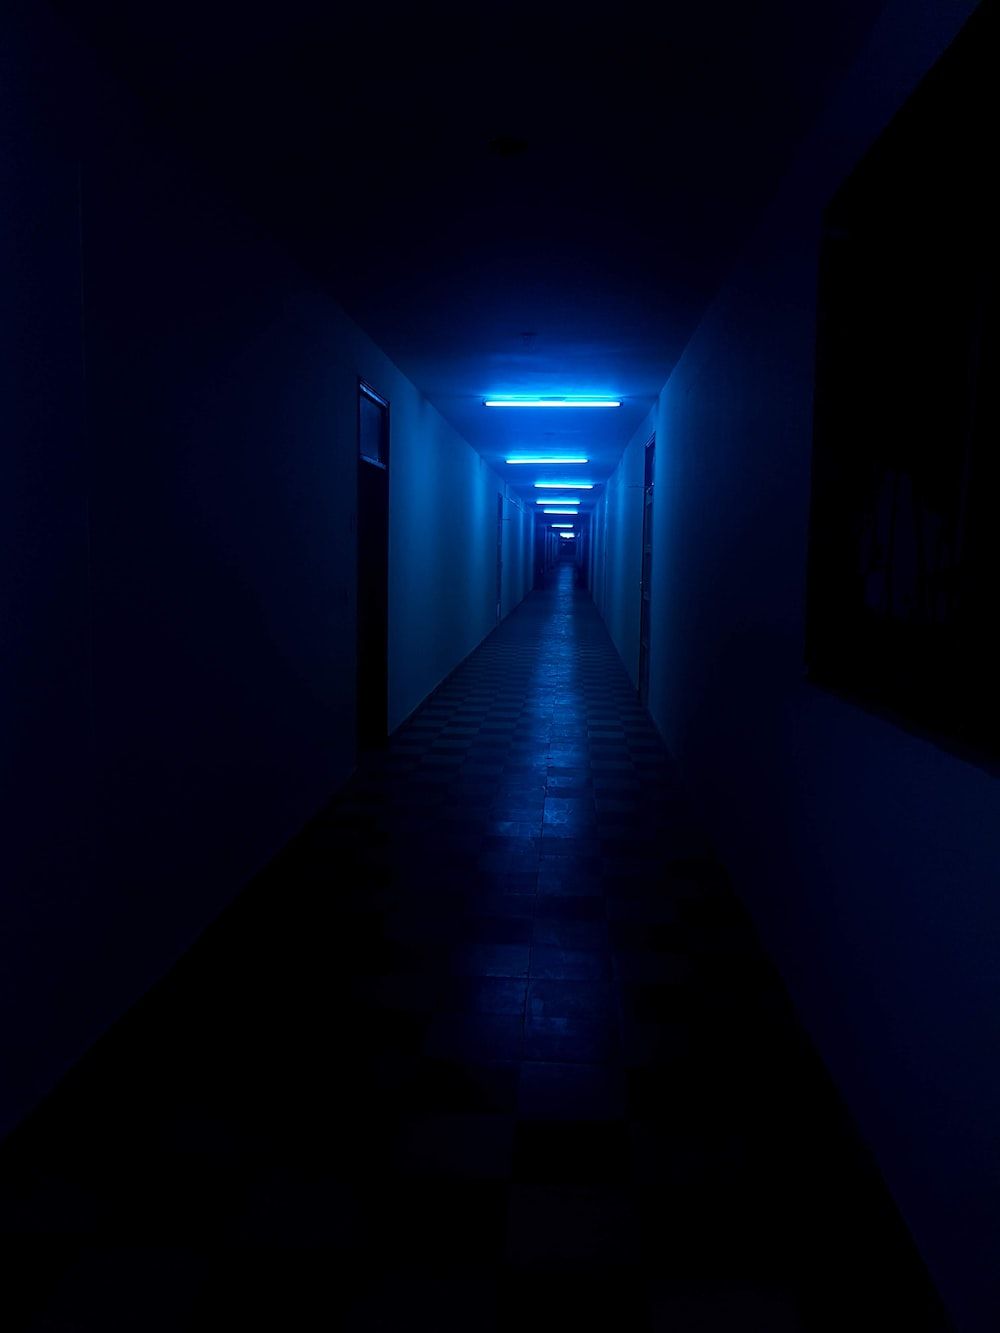 Neon Blue Picture [HD]. Download Free Image